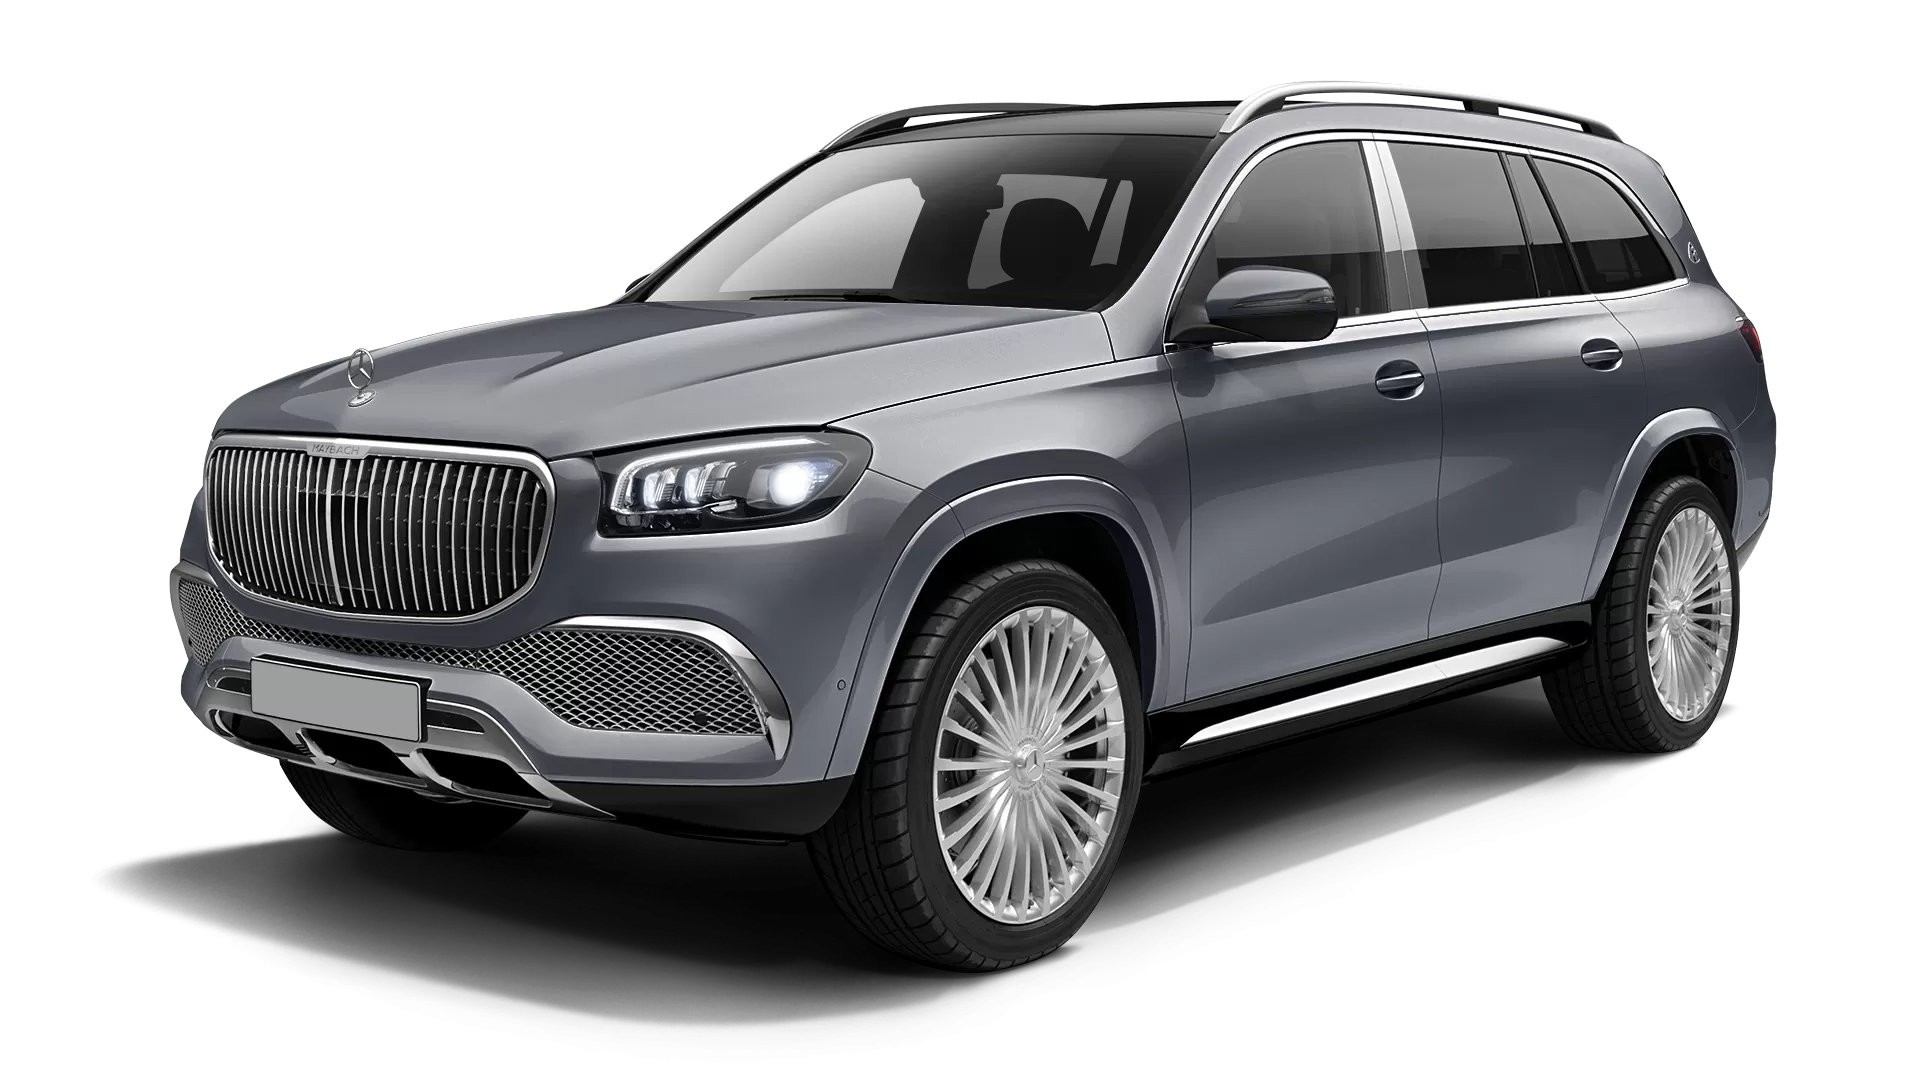 Mercedes Maybach GLS 600 stock front view in Selenite Grey color